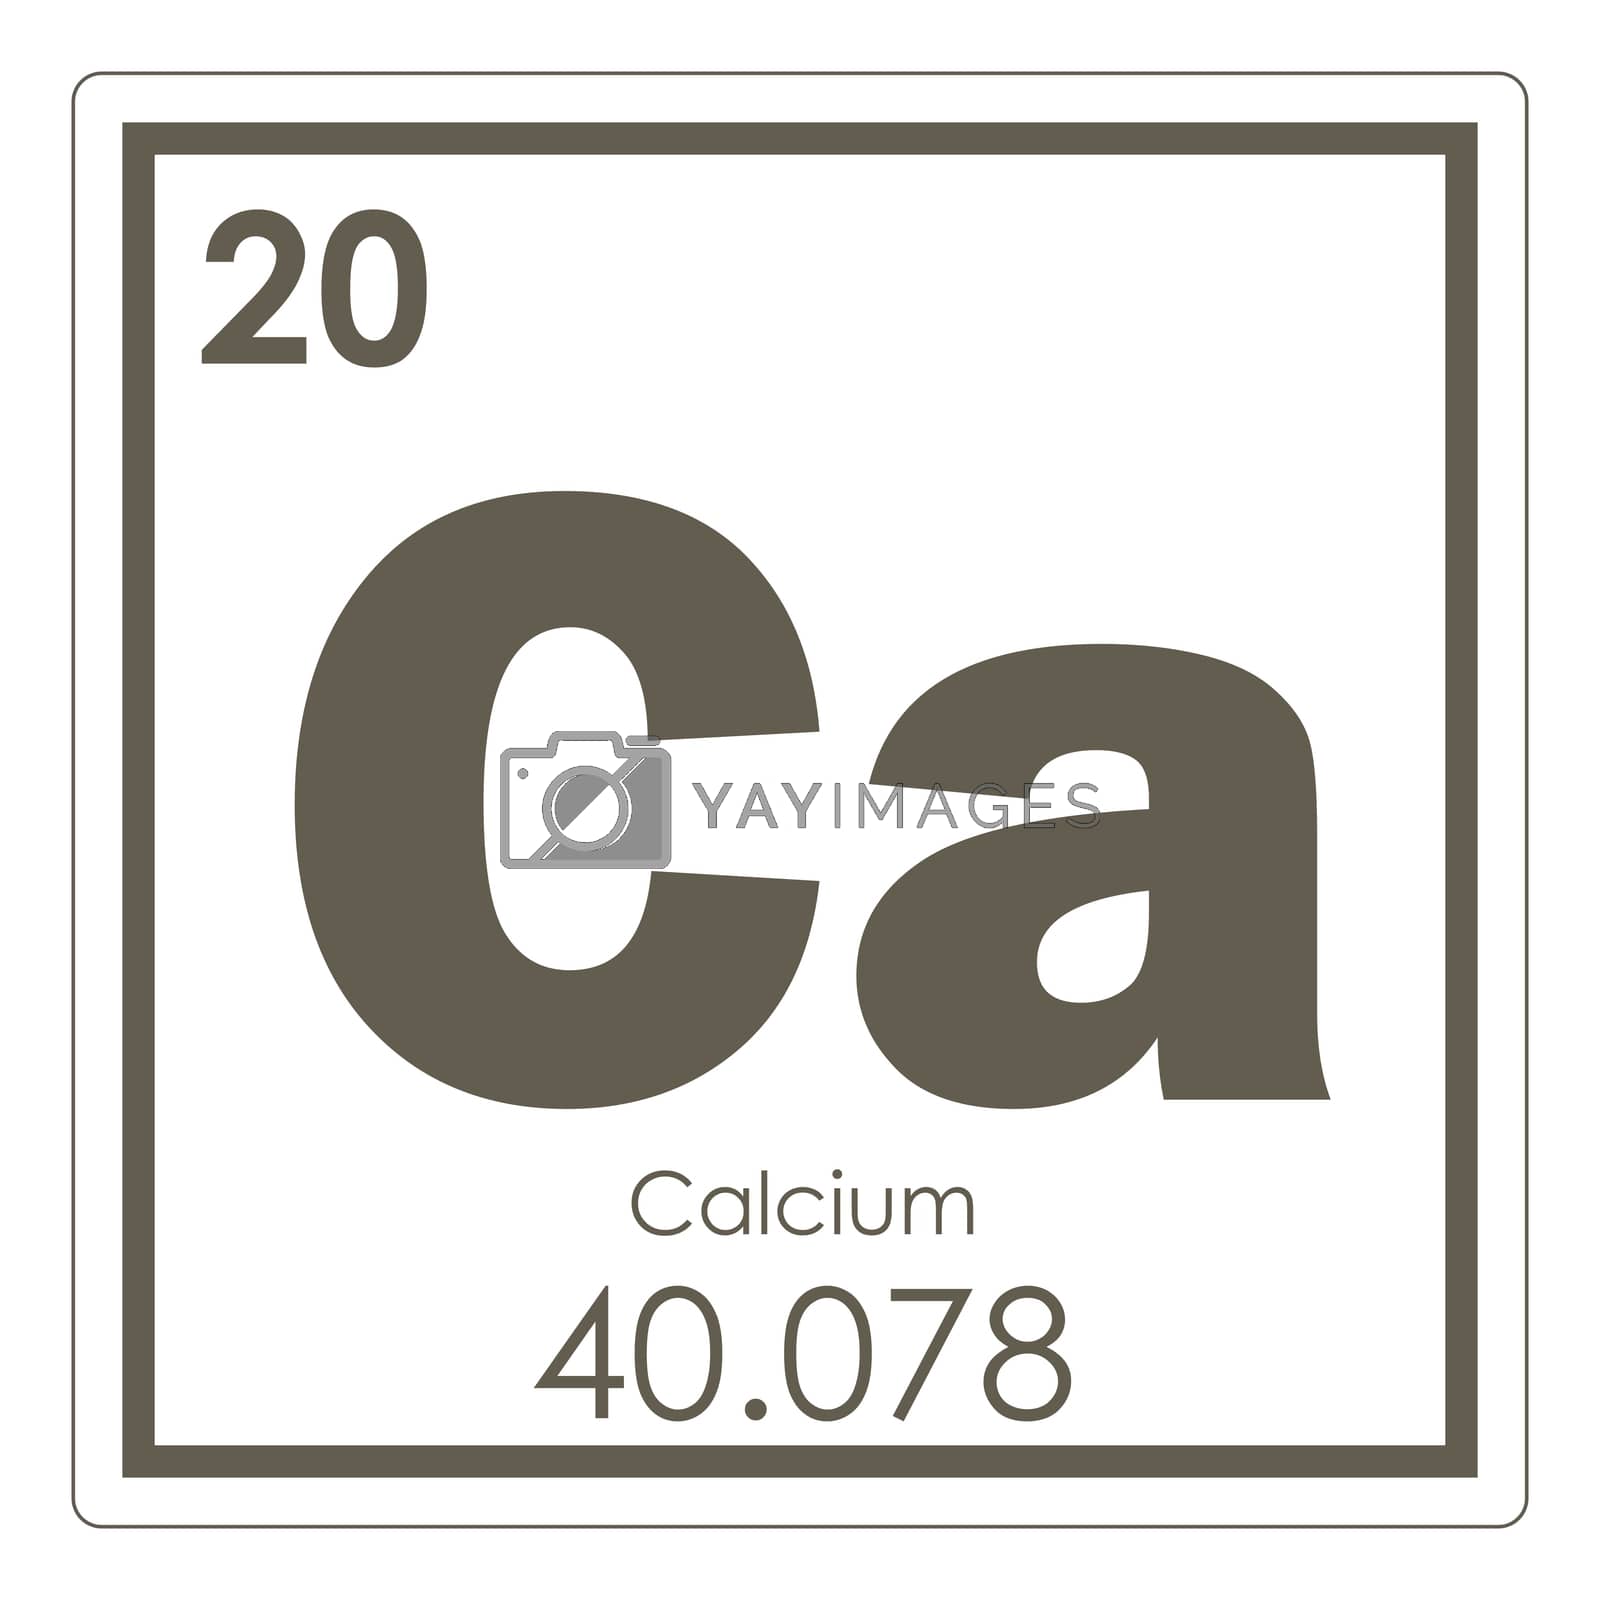 Royalty free image of Calcium chemical element by tony4urban